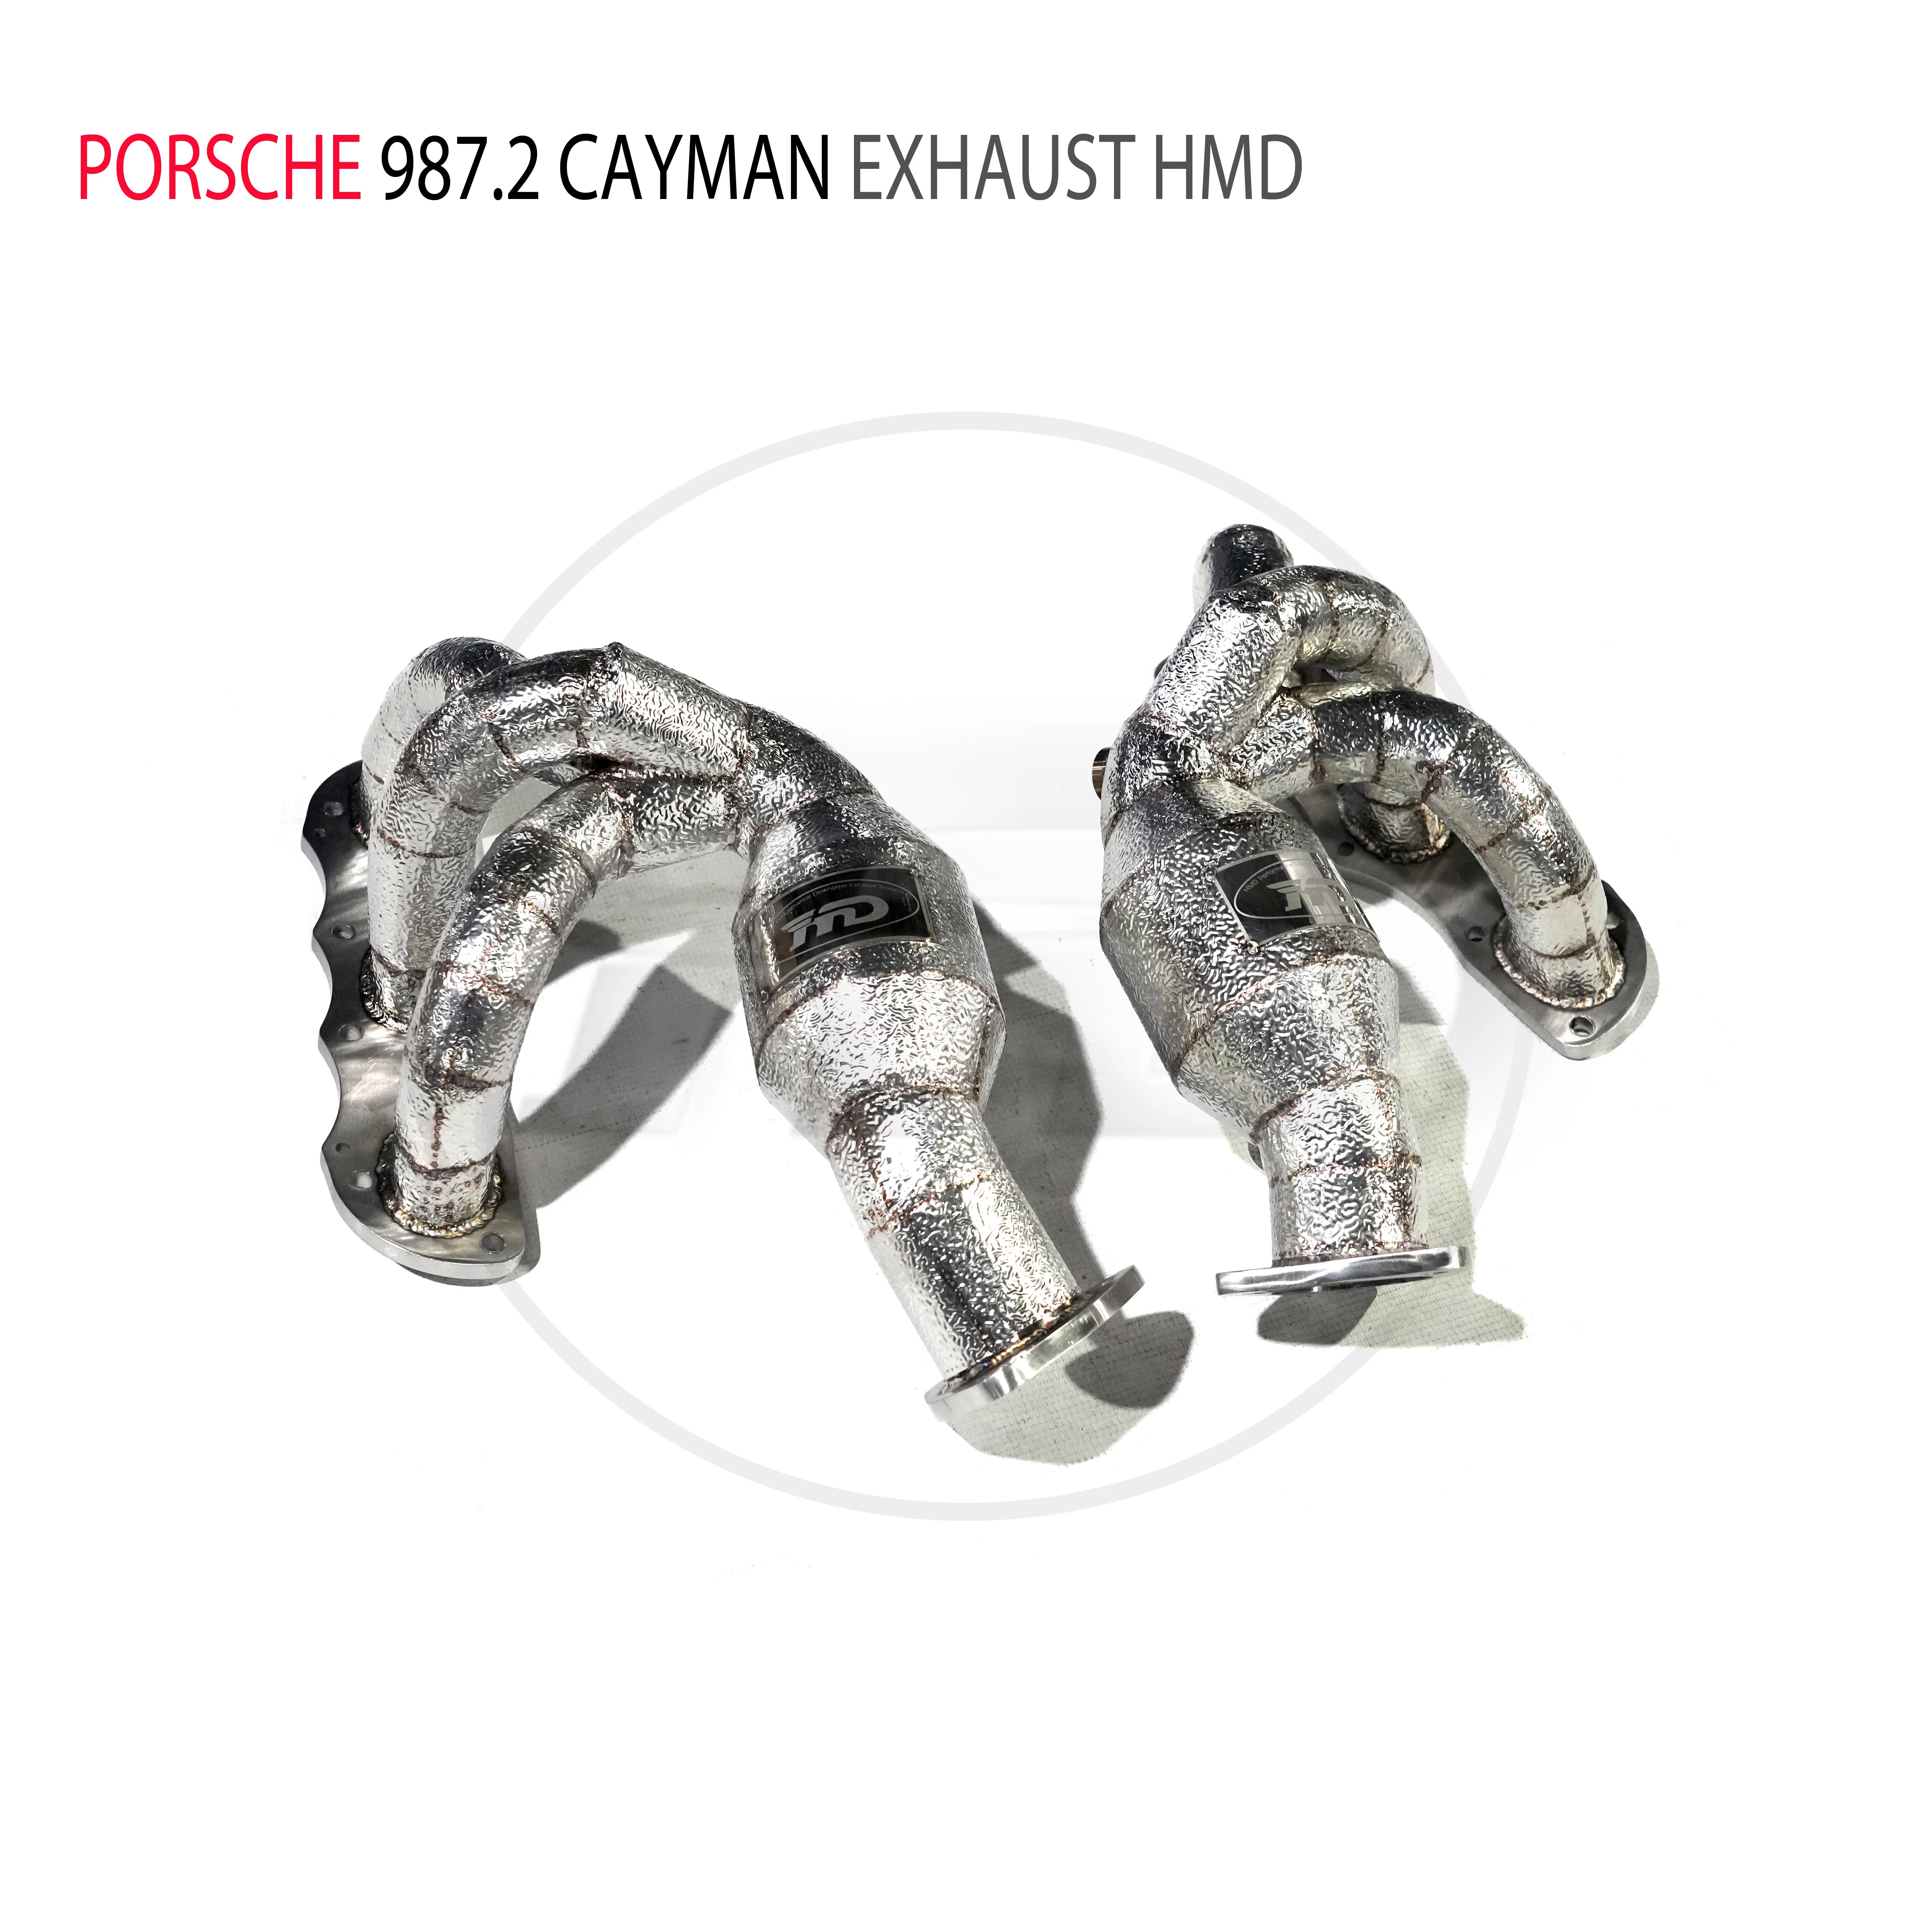 

HMD Exhaust Manifold High Flow Downpipe for Porsche 987.2 Cayman Car Accessories With Catalytic Converter Header Catless Pipe